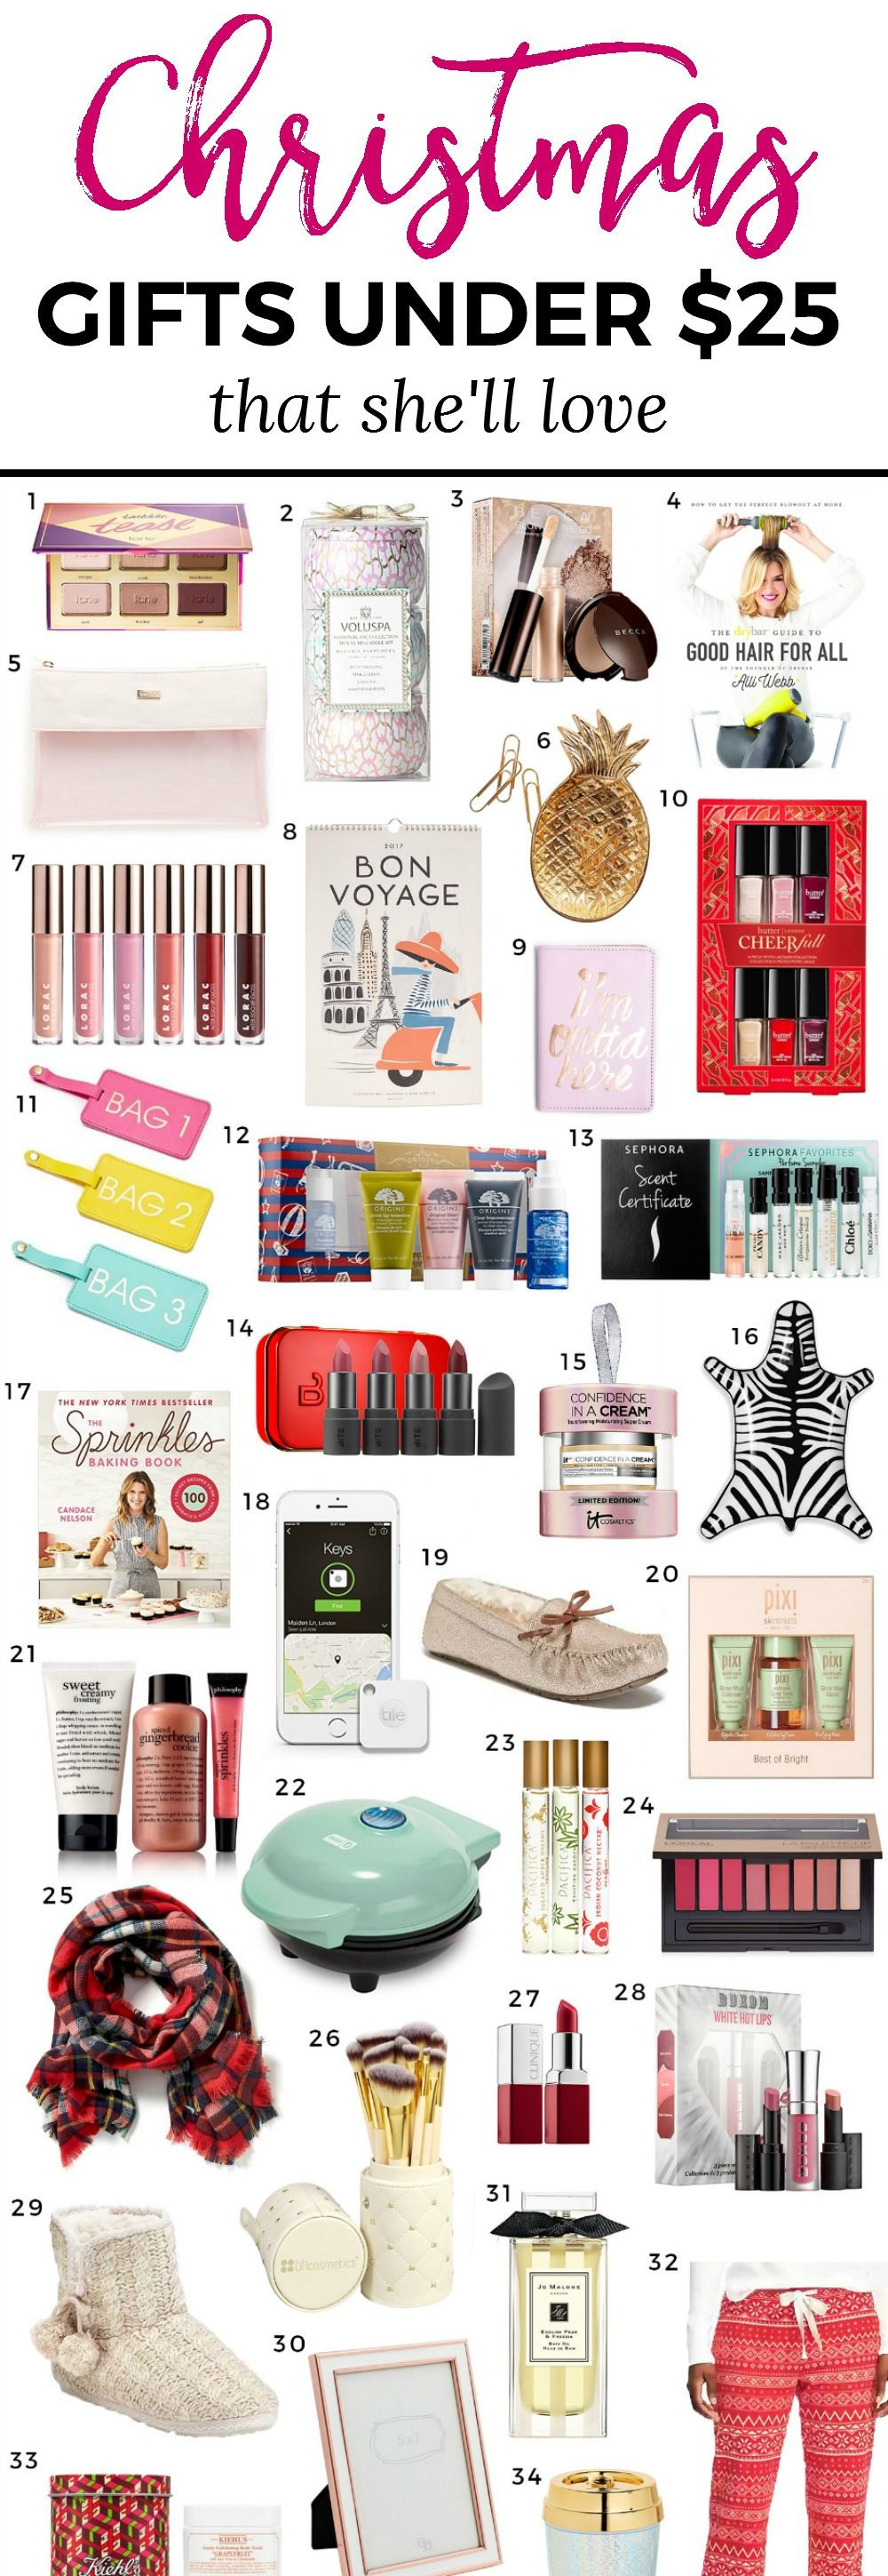 Christmas Gift Ideas Under $25
 The Best Christmas Gift Ideas for Women under $25